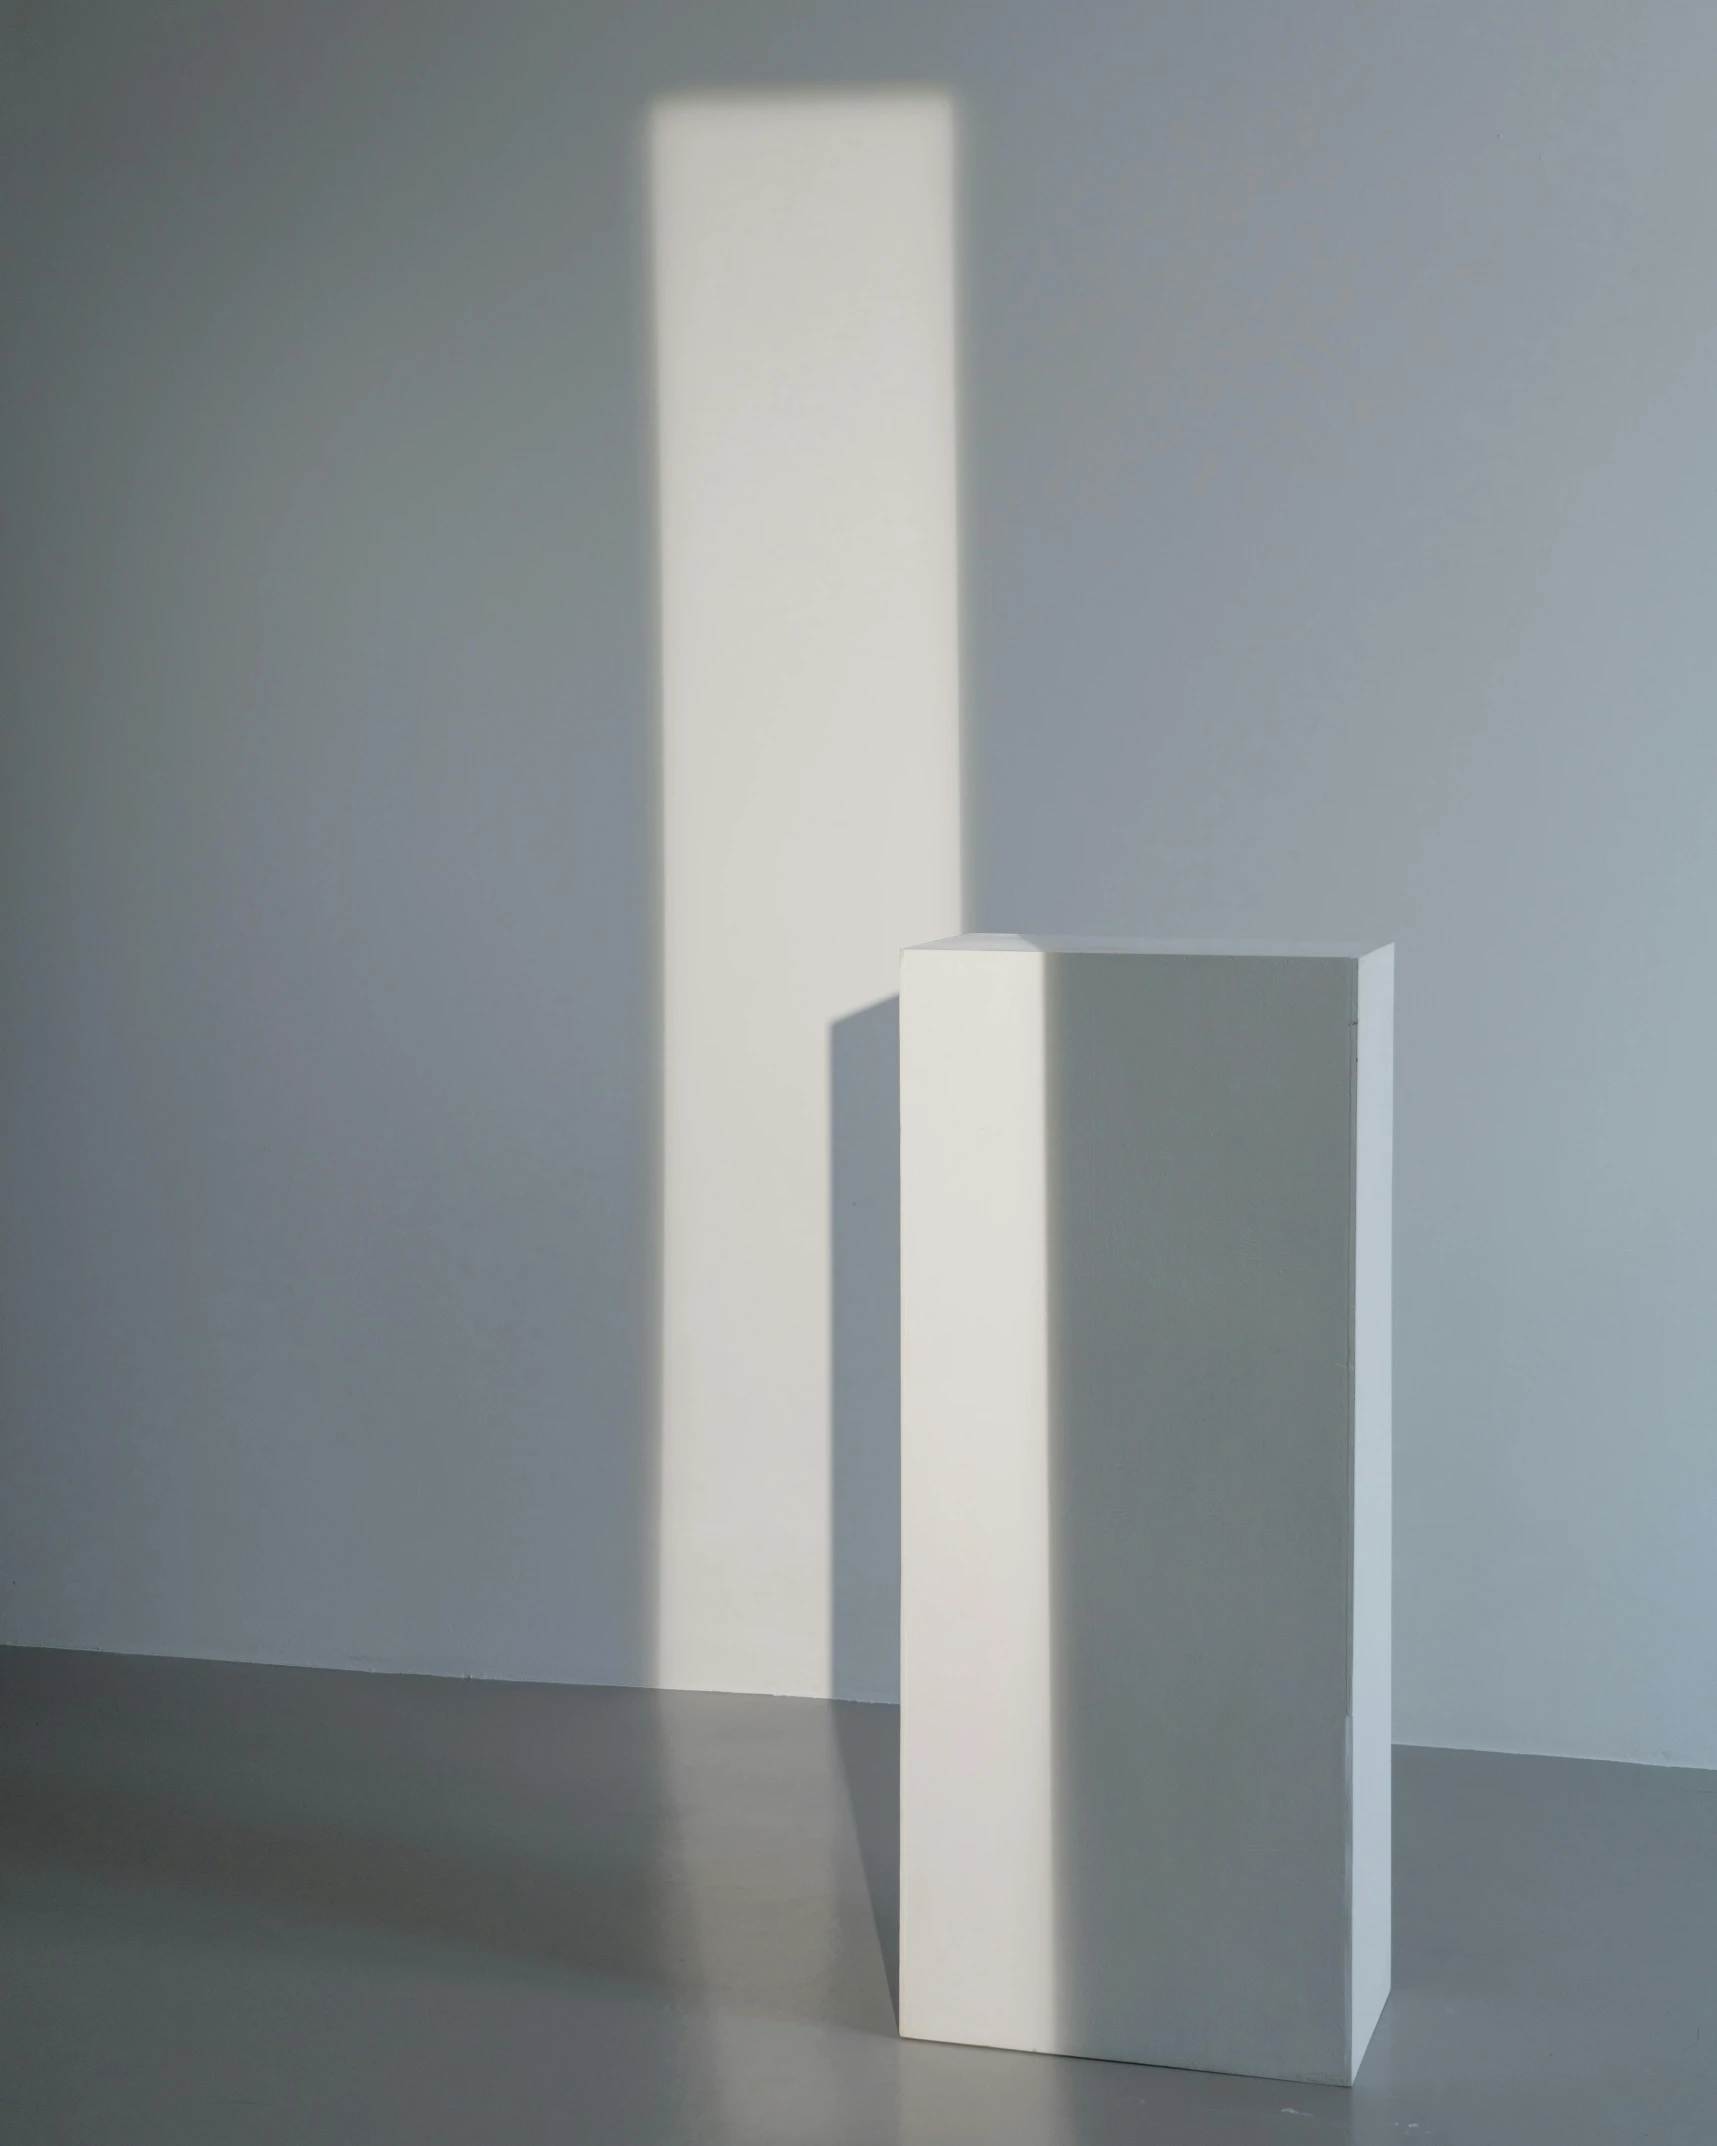 a couple of tall white pedestals in a room, inspired by Donald Judd, unsplash, light and space, modeled lighting, sun beam, ignant, angle view